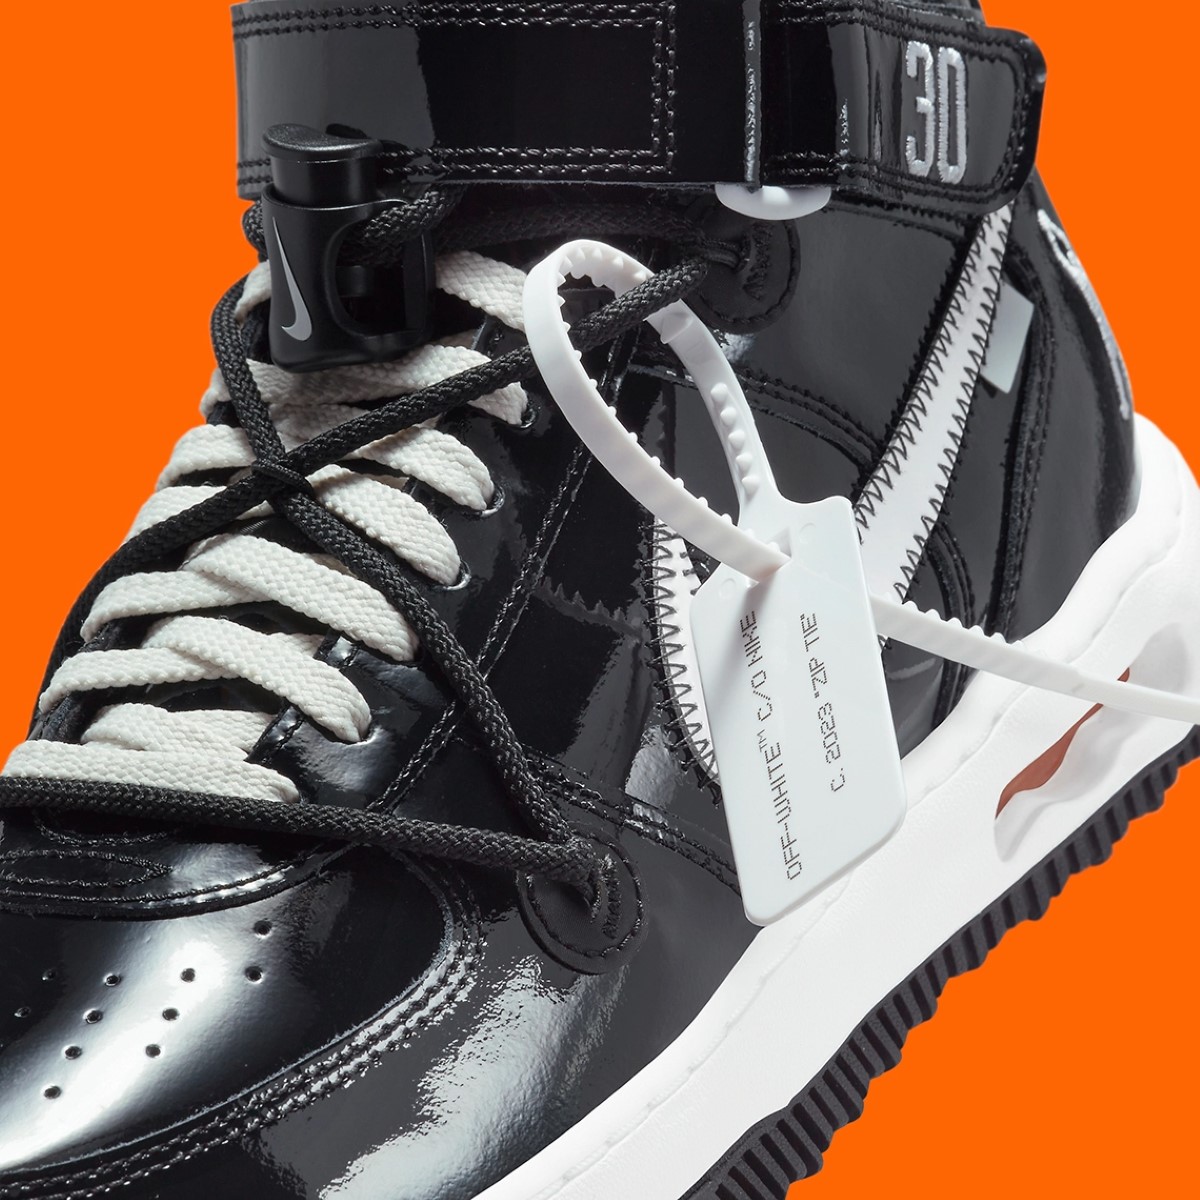 Experience the Off-White x Nike Air Force 1 Mid “Sheed" through official images